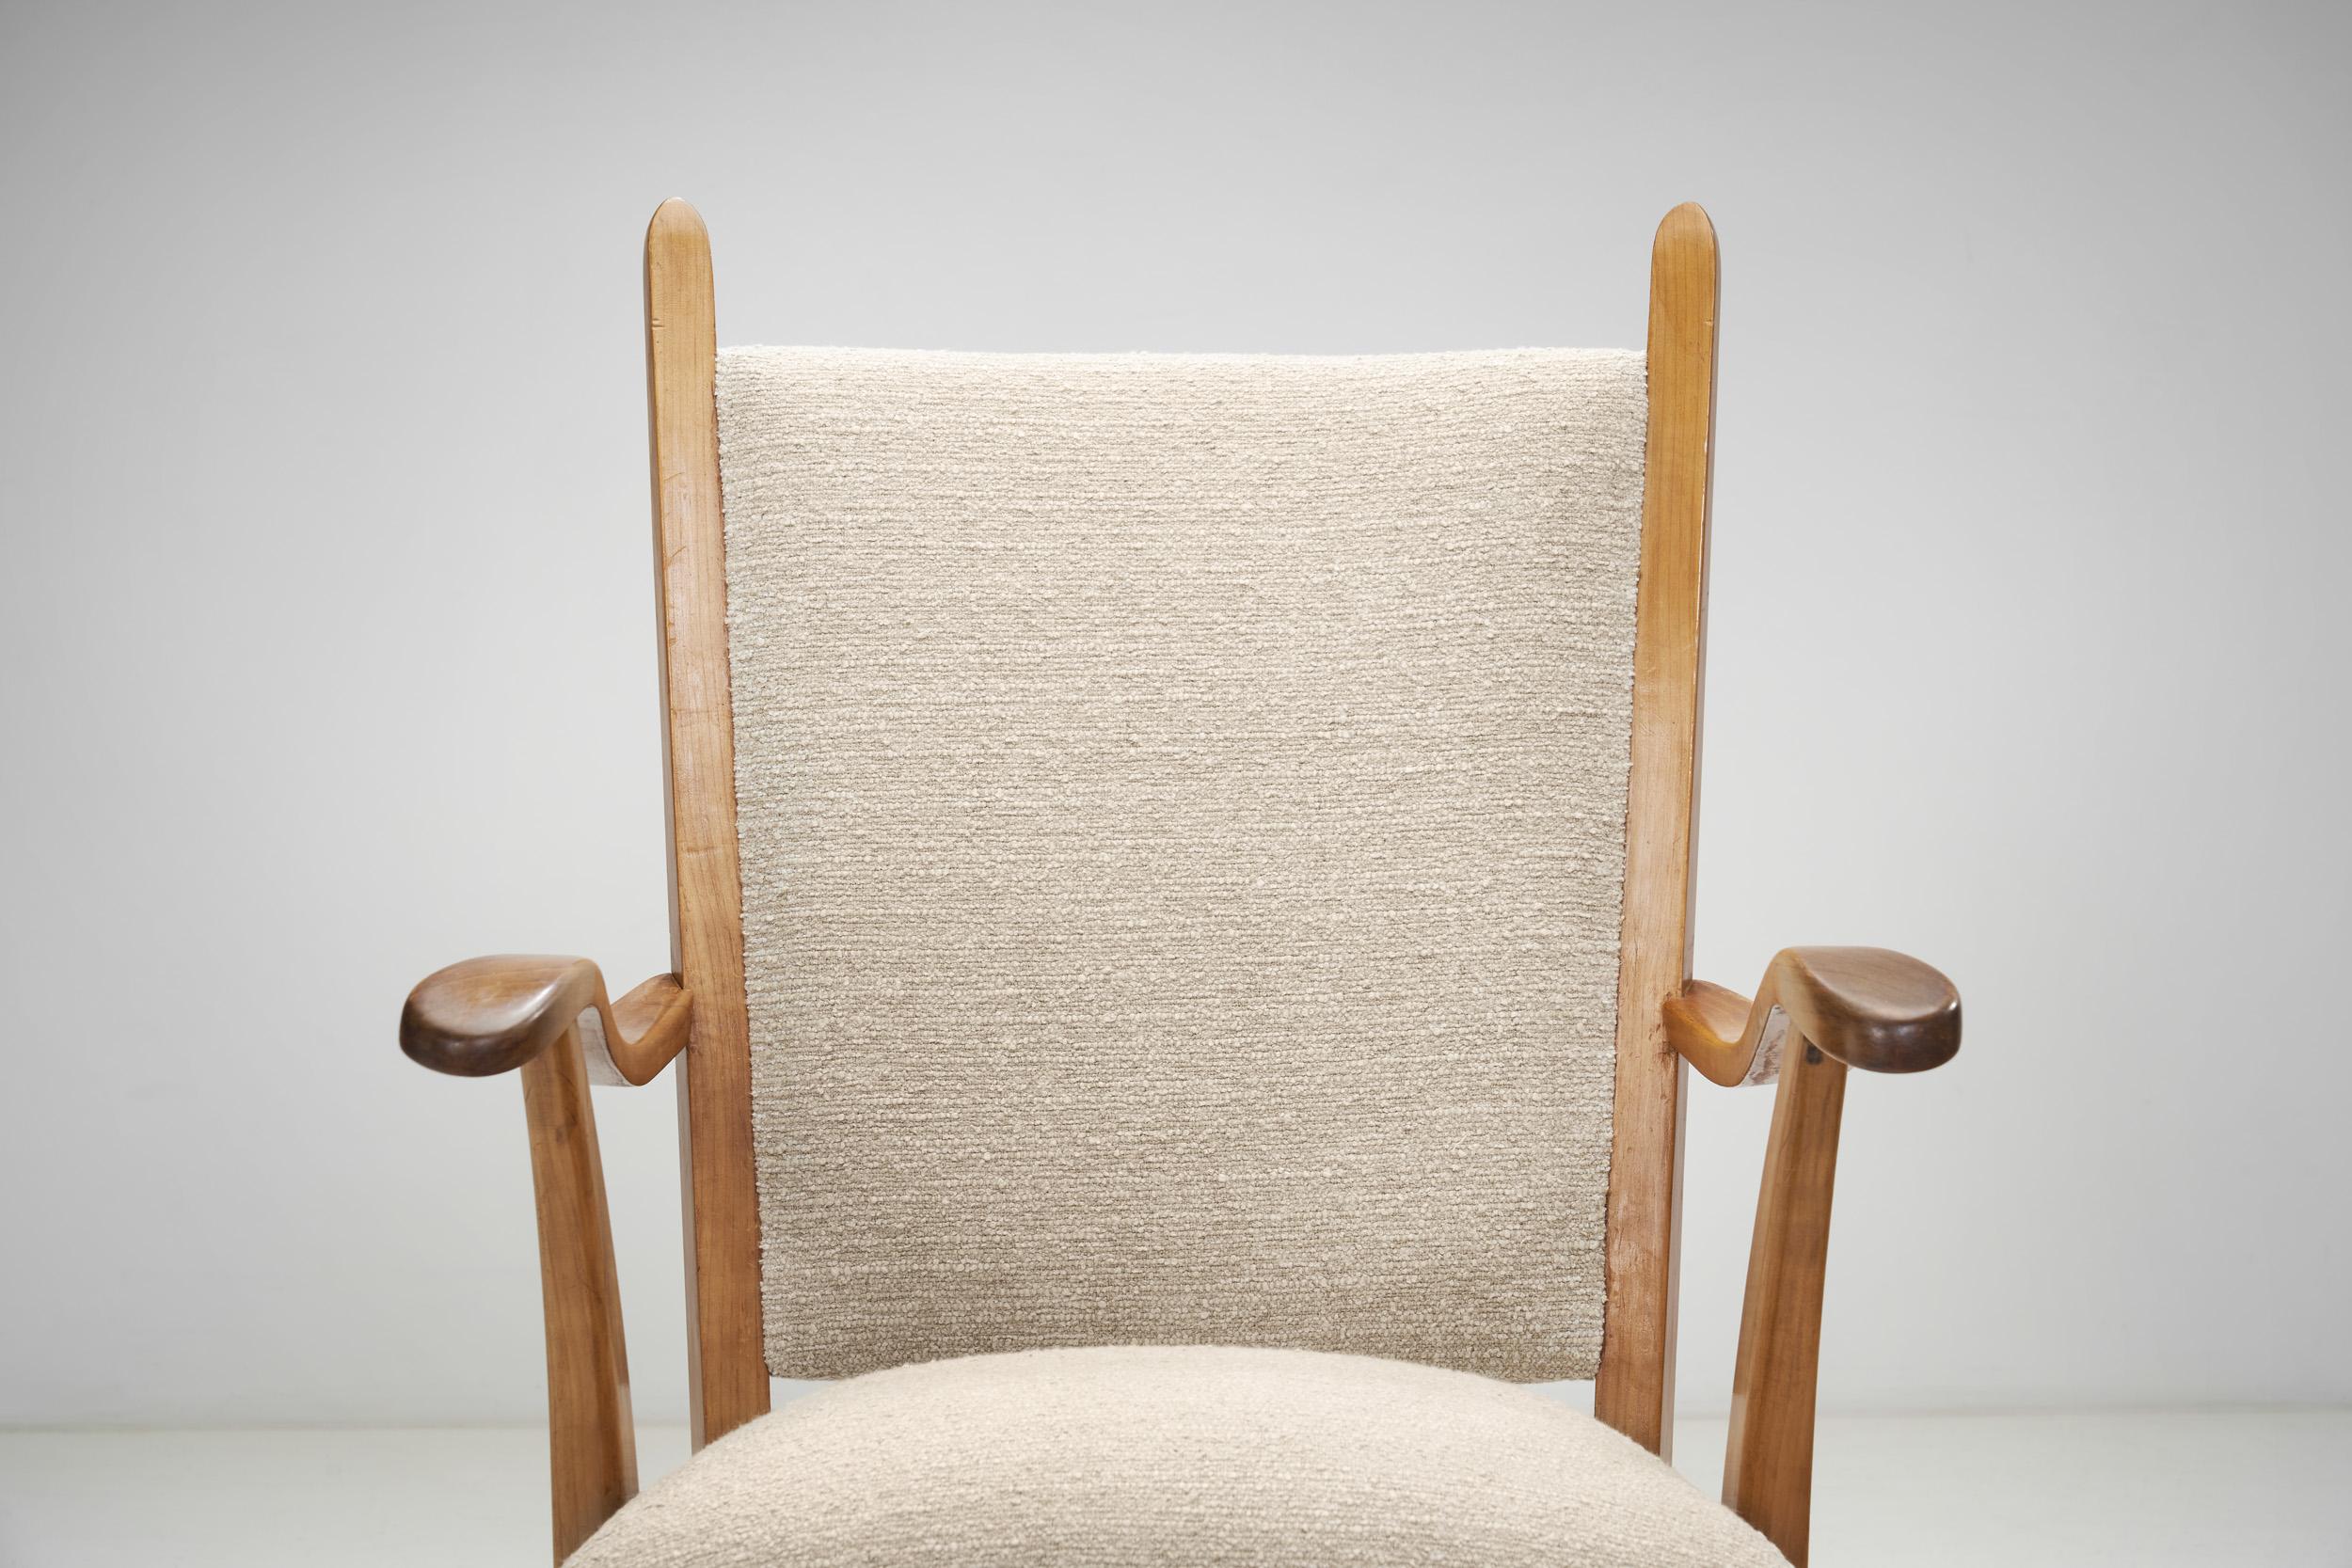 Wood Upholstered Armchair by Bas Van Pelt for My Home, The Netherlands 1940s For Sale